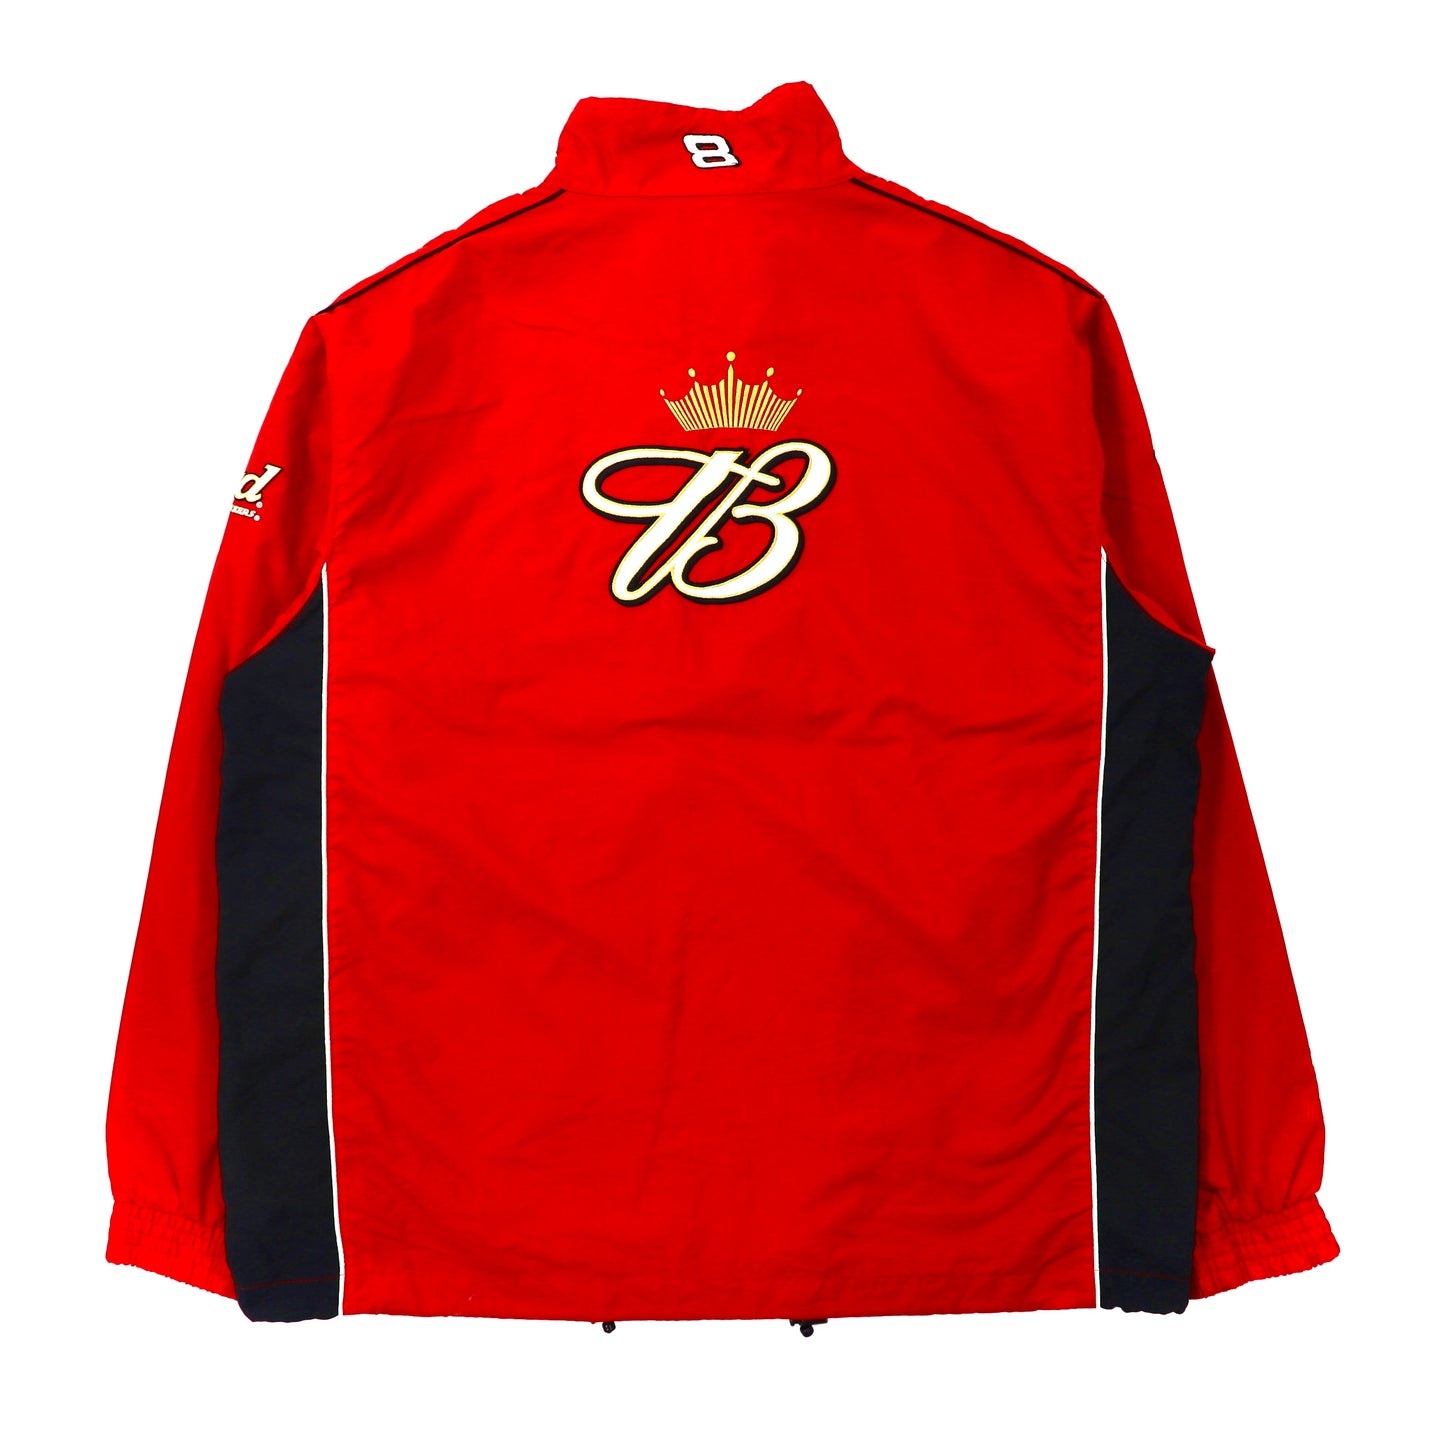 CHASE AUTHENTICS Racing Jacket M Red Nylon Budweiser Embroidery 